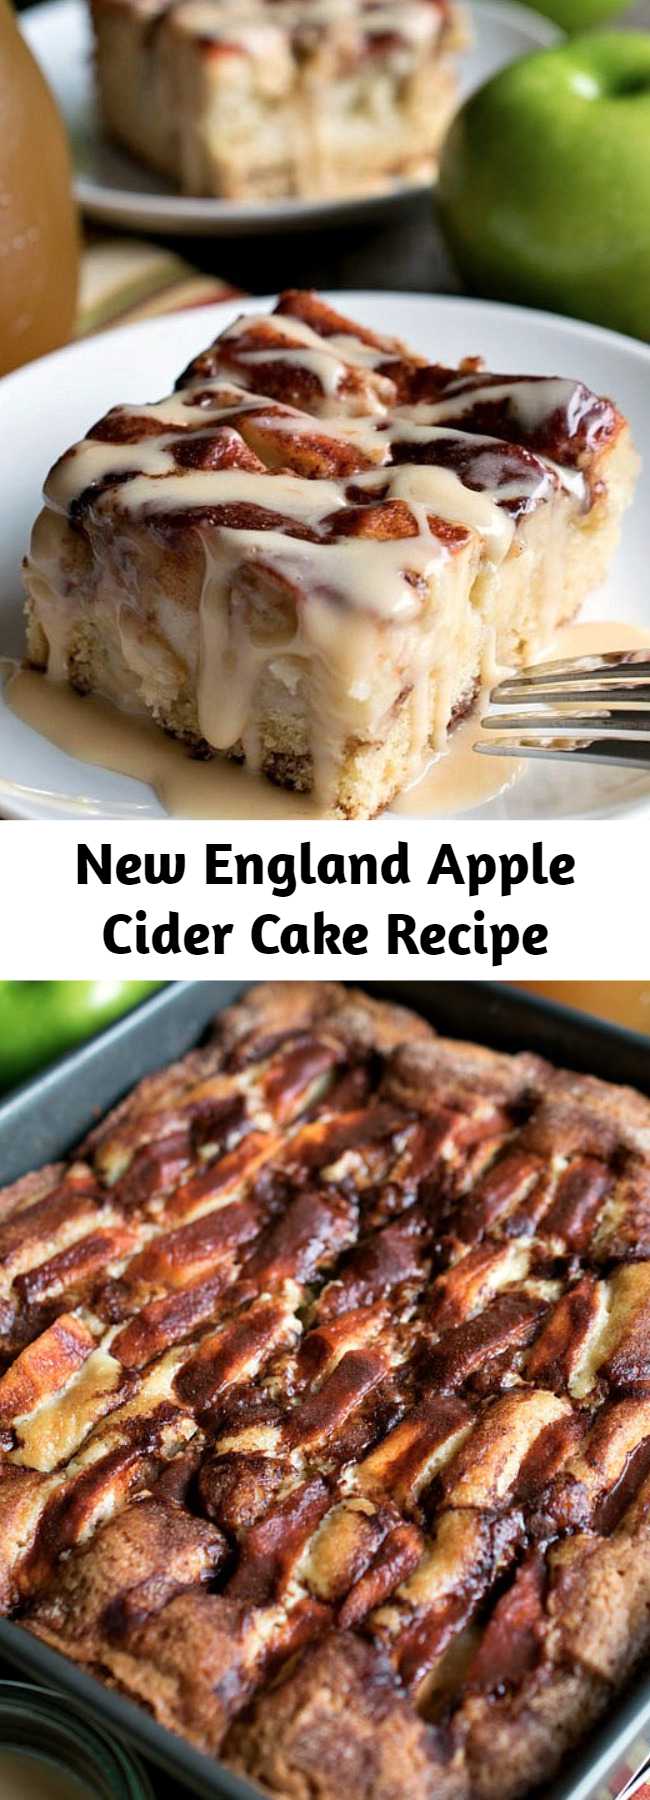 New England Apple Cider Cake Recipe - Very delicious... chock full of sliced Granny Smith apples in a simple, sweet cake that gets great flavor and moisture from cinnamon, heavy cream and apple cider! This cake also has a delicious, creamy apple cider glaze that gets drizzled over the top when served!